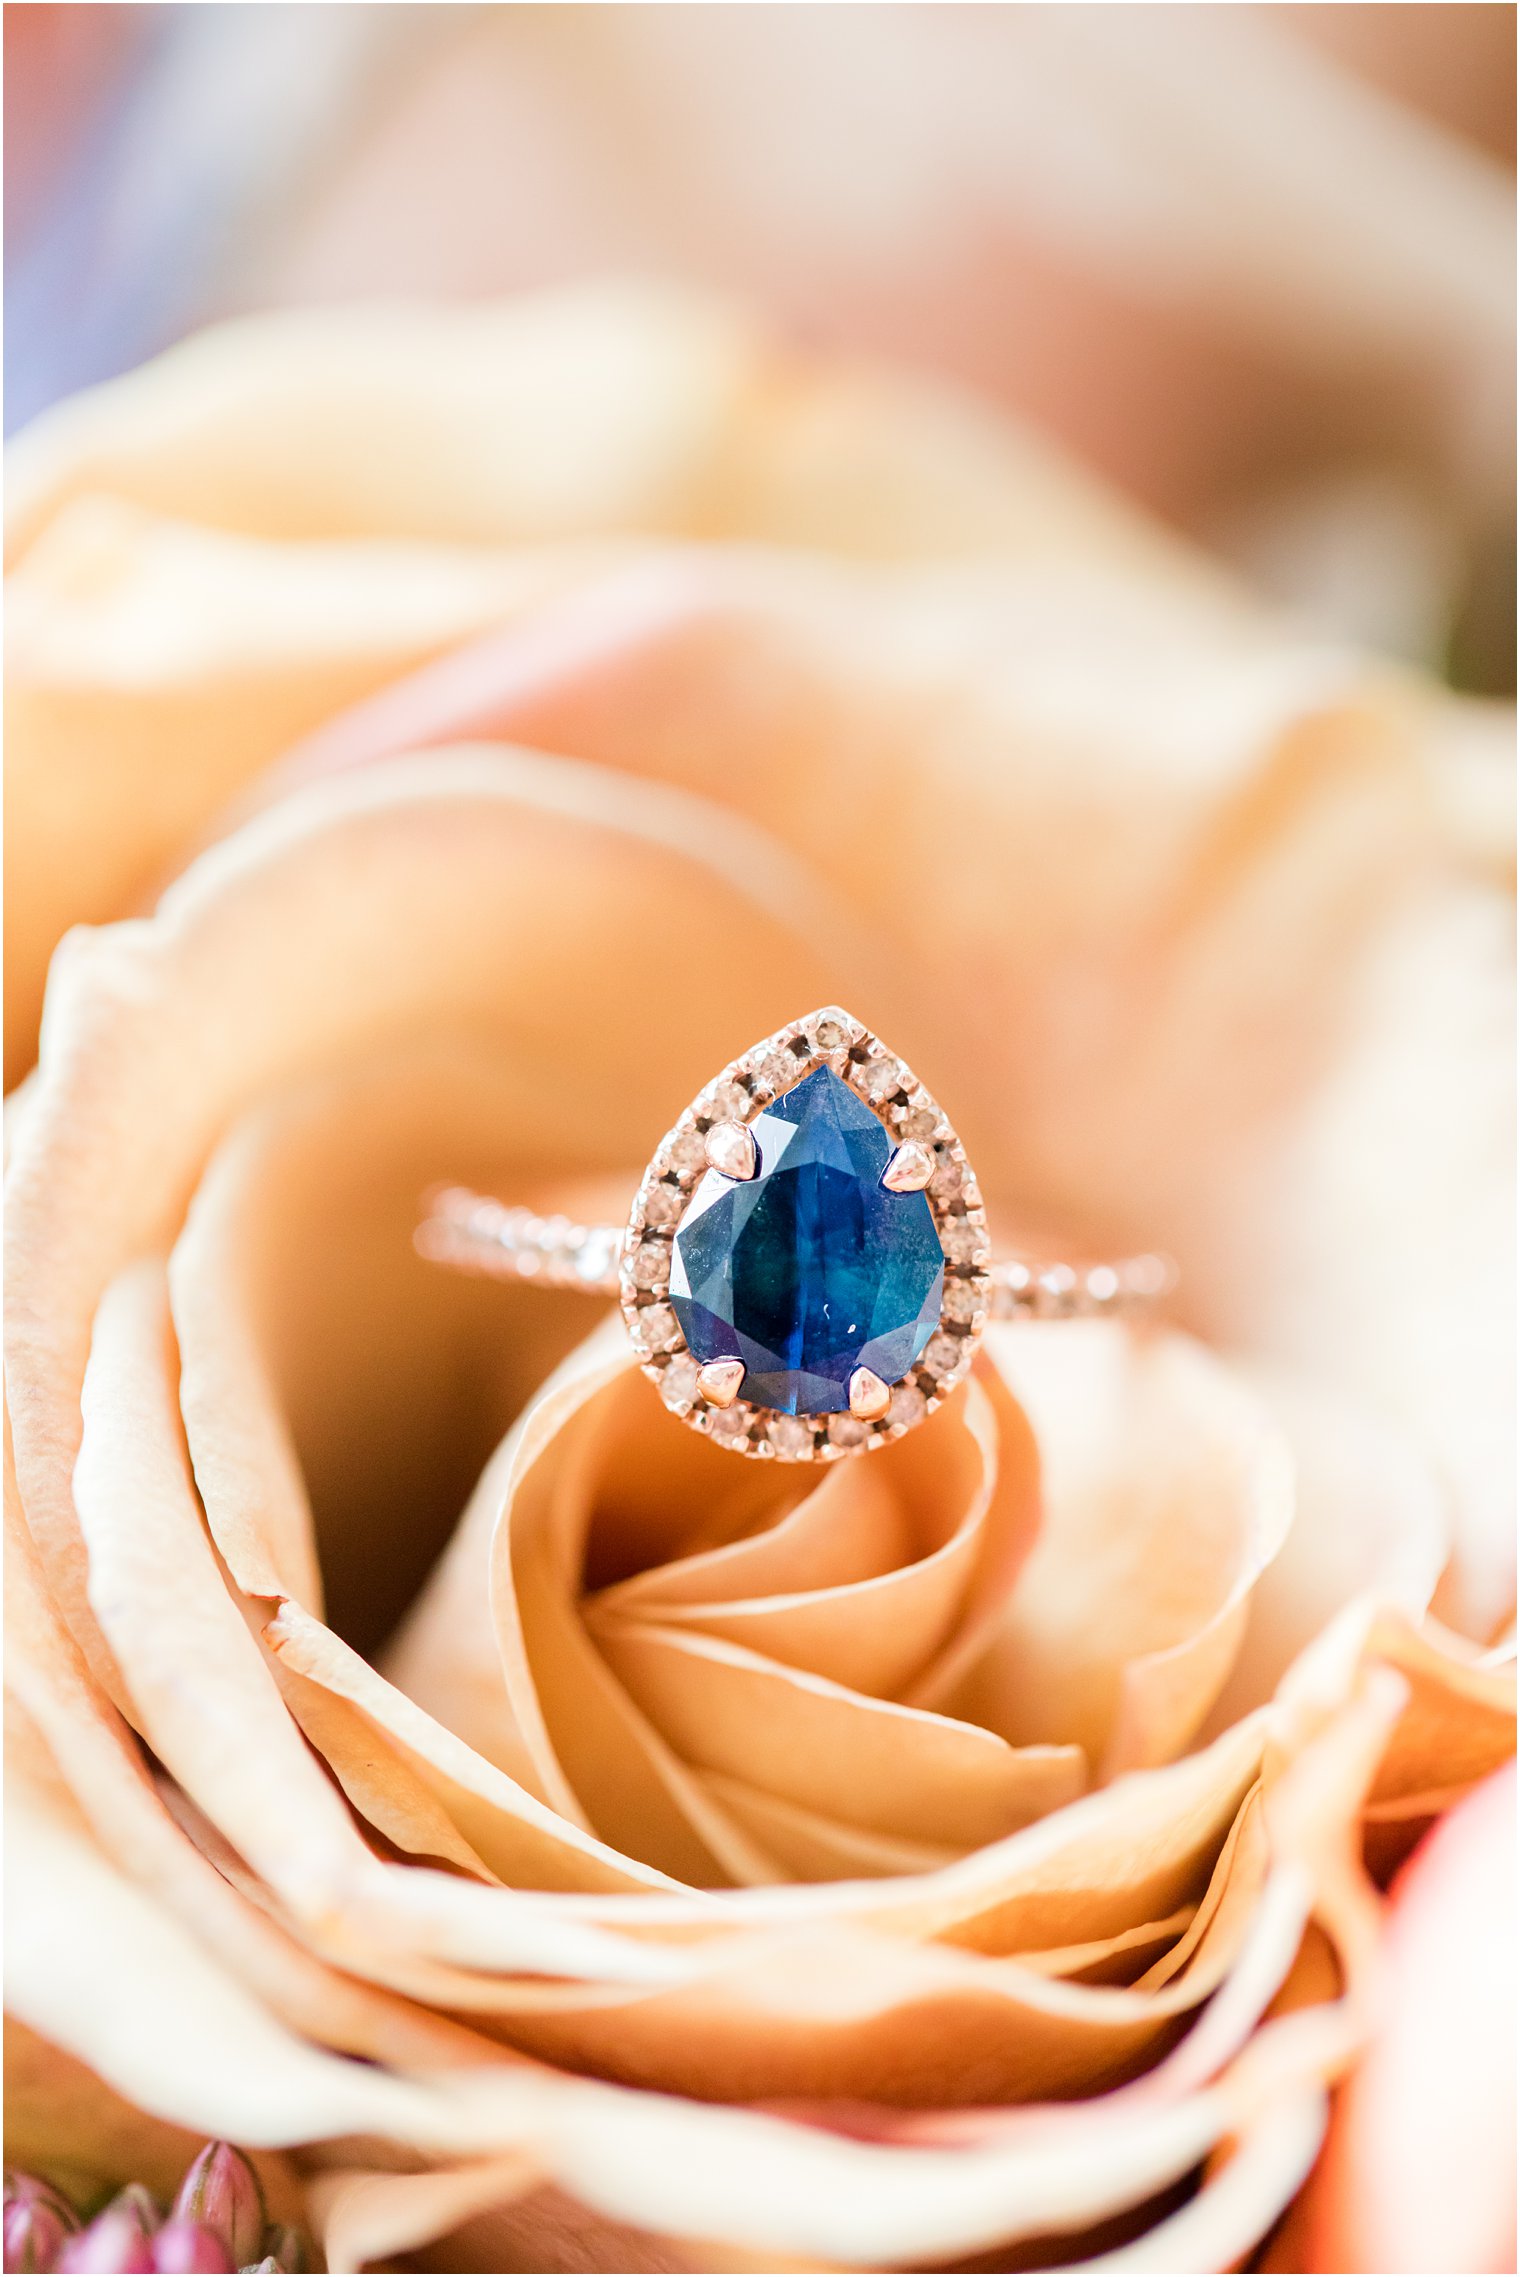 custom wedding ring with blue stone rests on peach rose